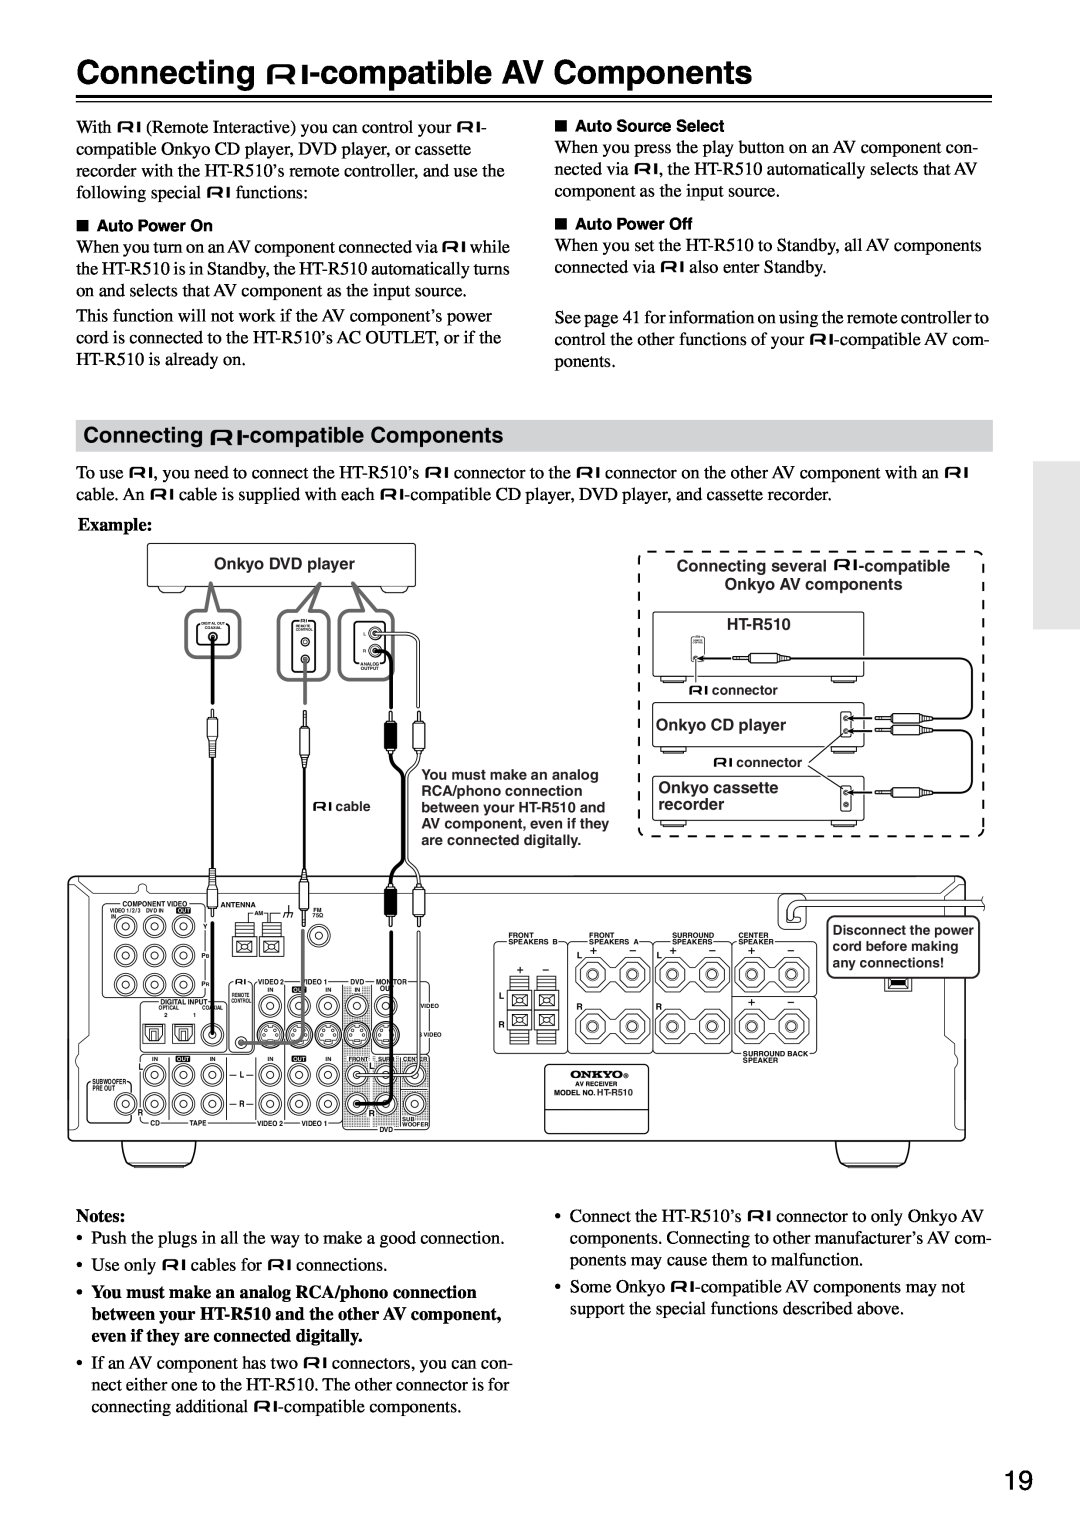 Onkyo HT-R510 instruction manual Connecting -compatibleAV Components, Connecting -compatibleComponents 